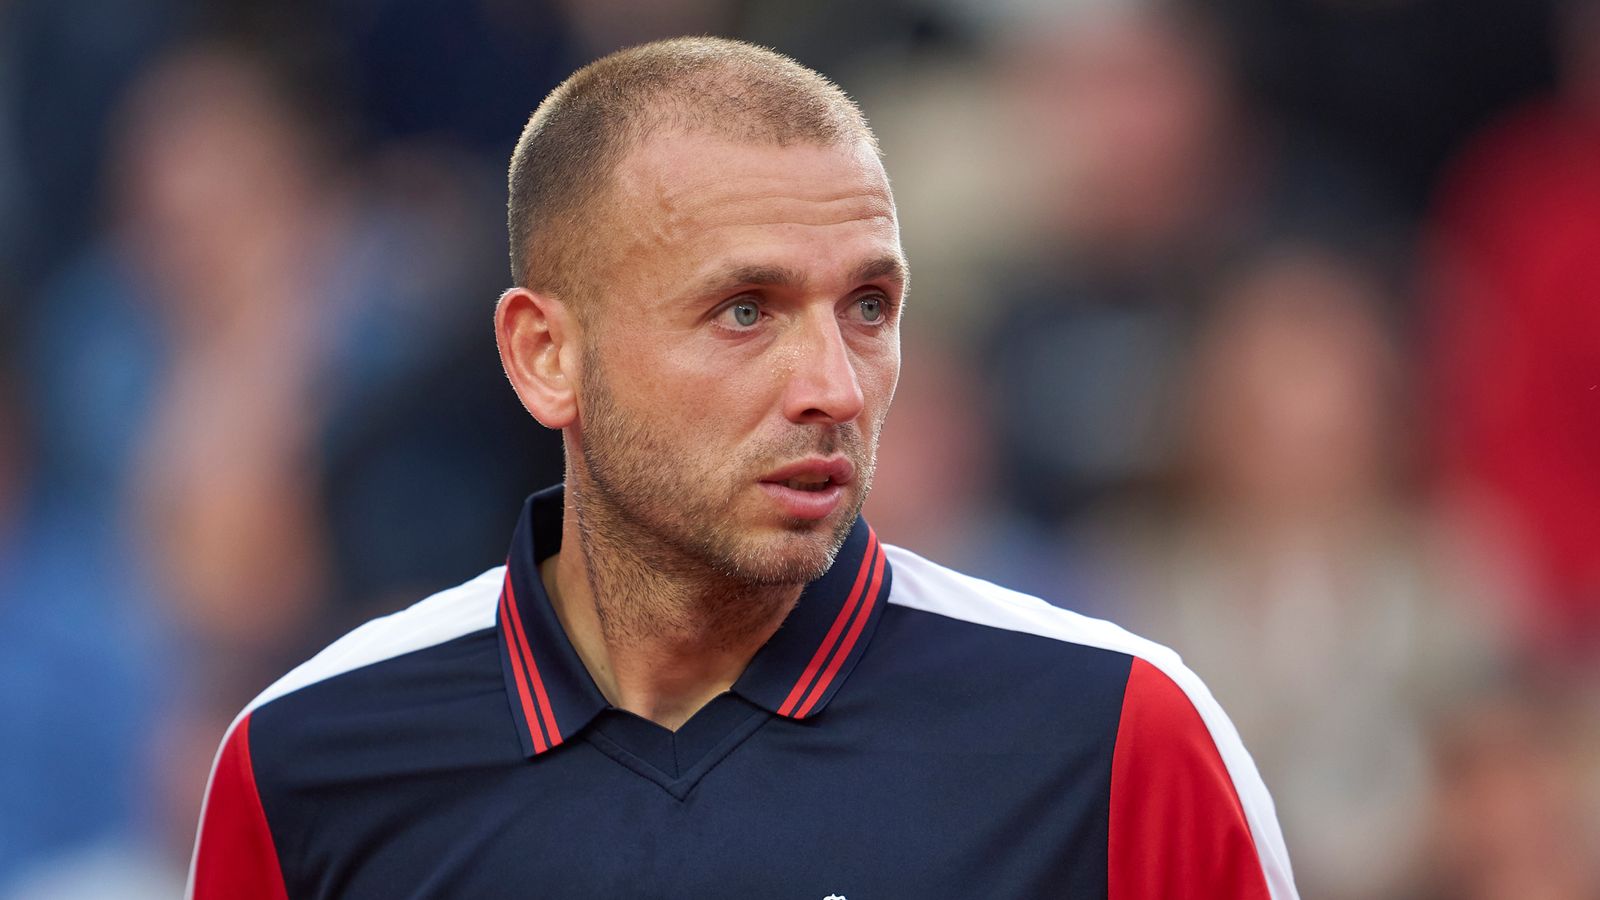 Dan Evans suffers first-round French Open defeat to Holger Rune | Tennis News